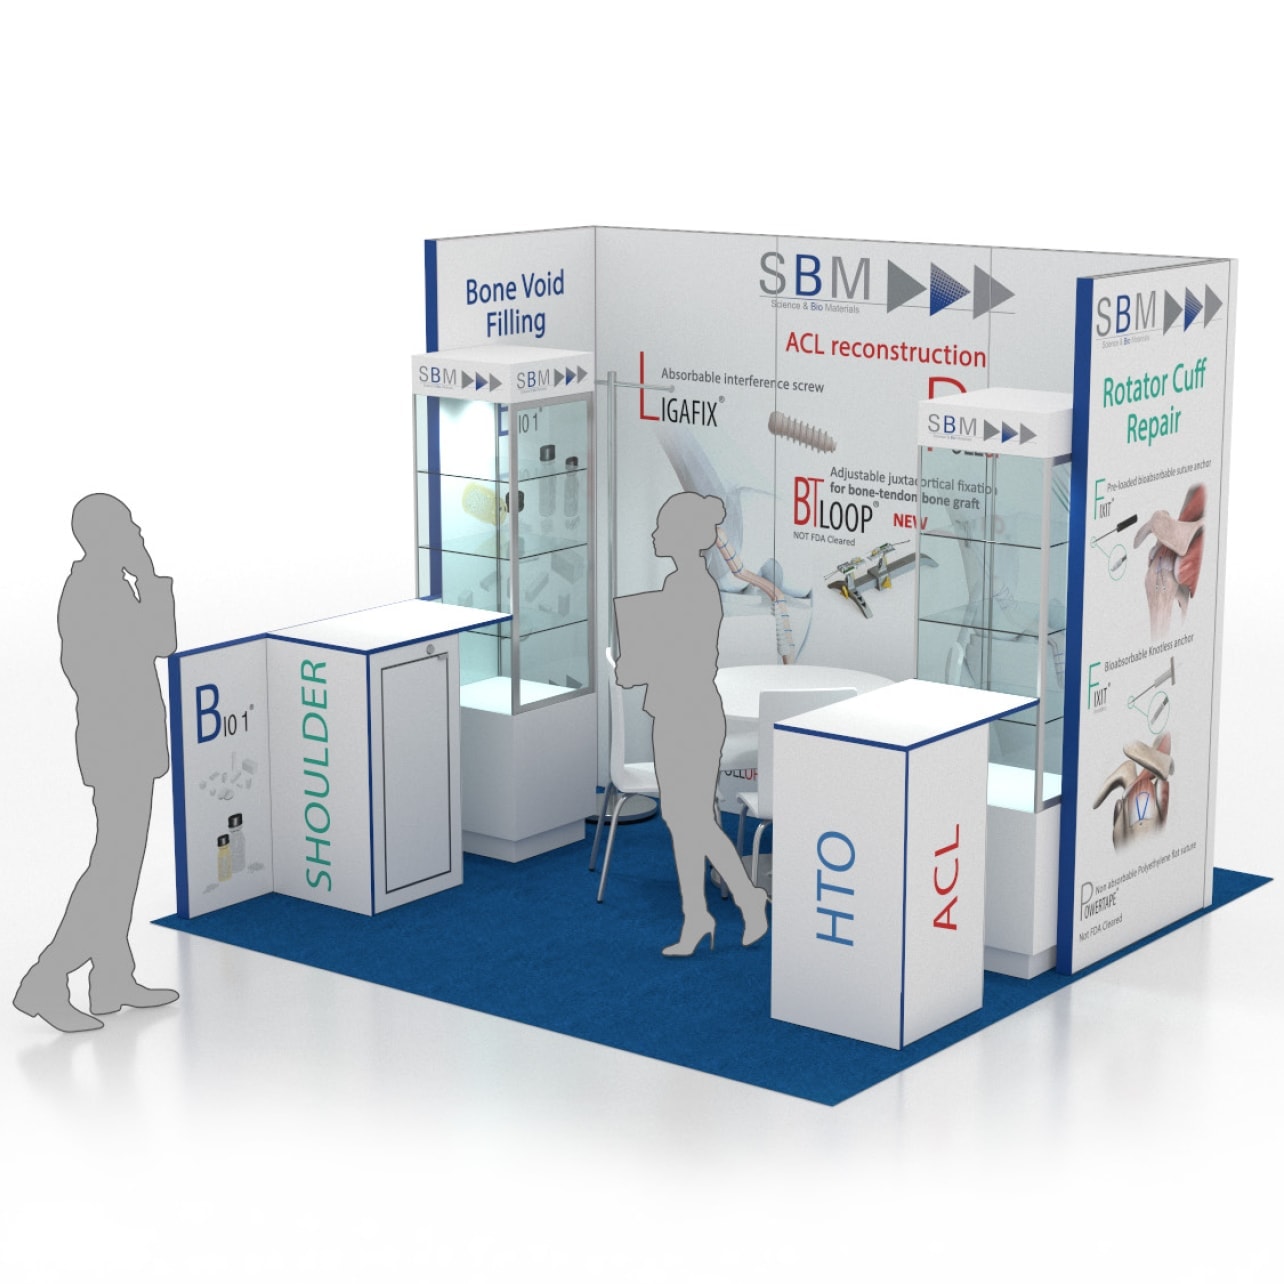 10-trade-show-booth-design-lessons-learned-the-hard-way-the-mx-group-riset